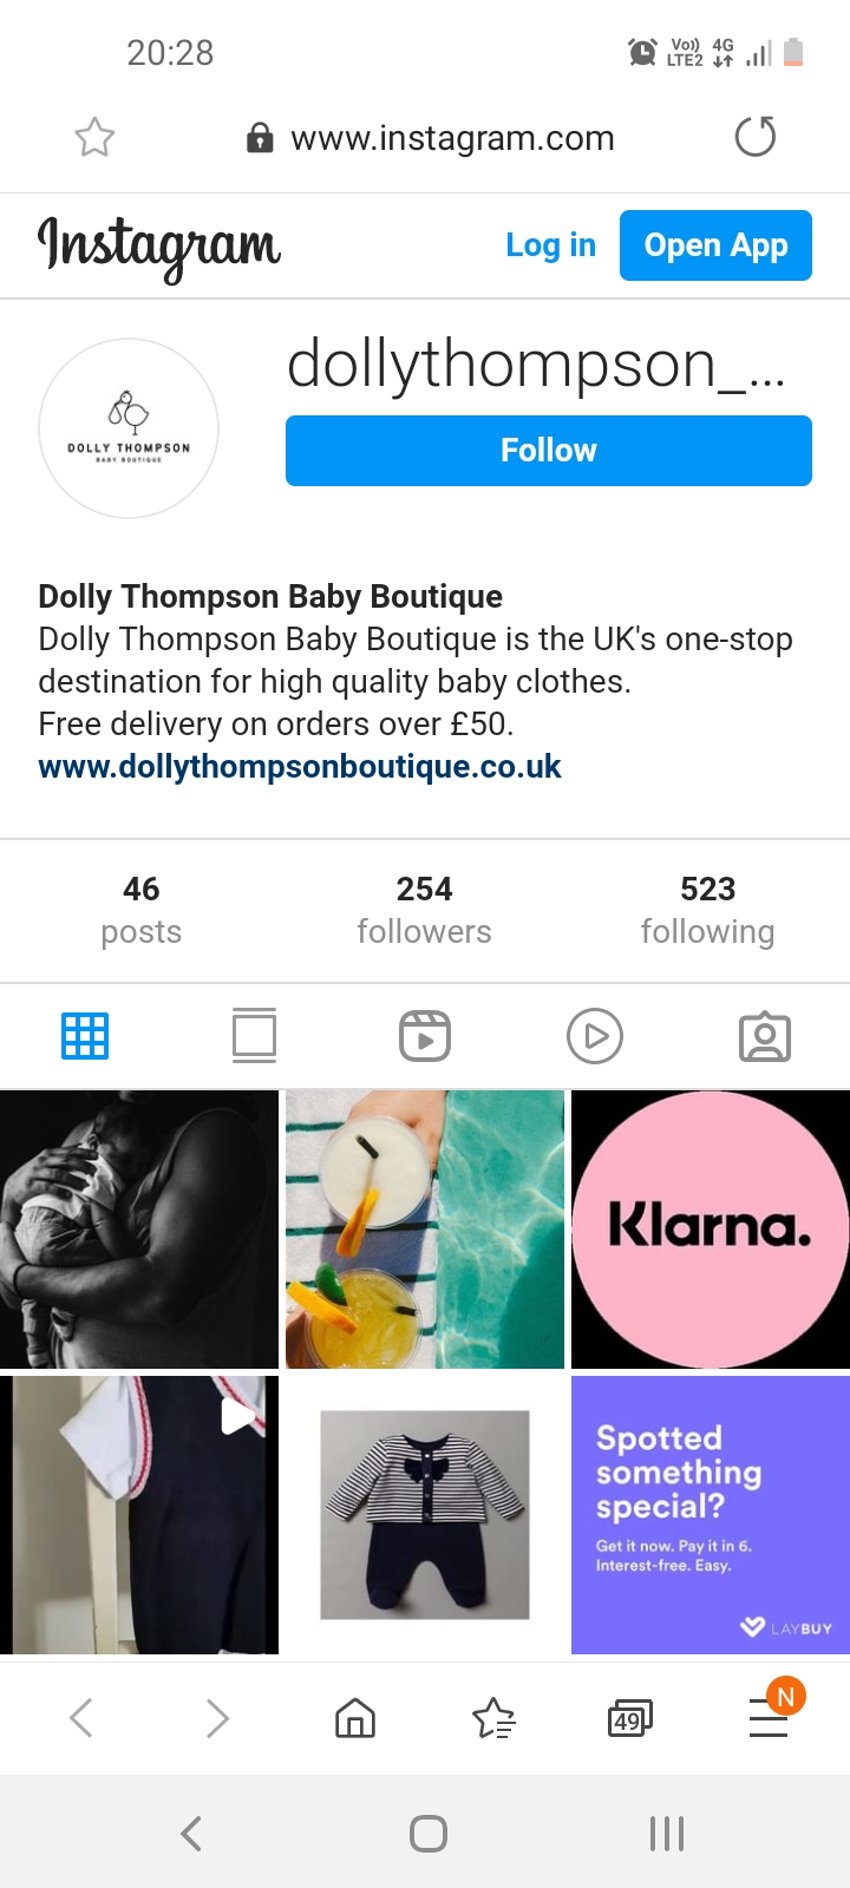 dolly-thompson-baby-boutique